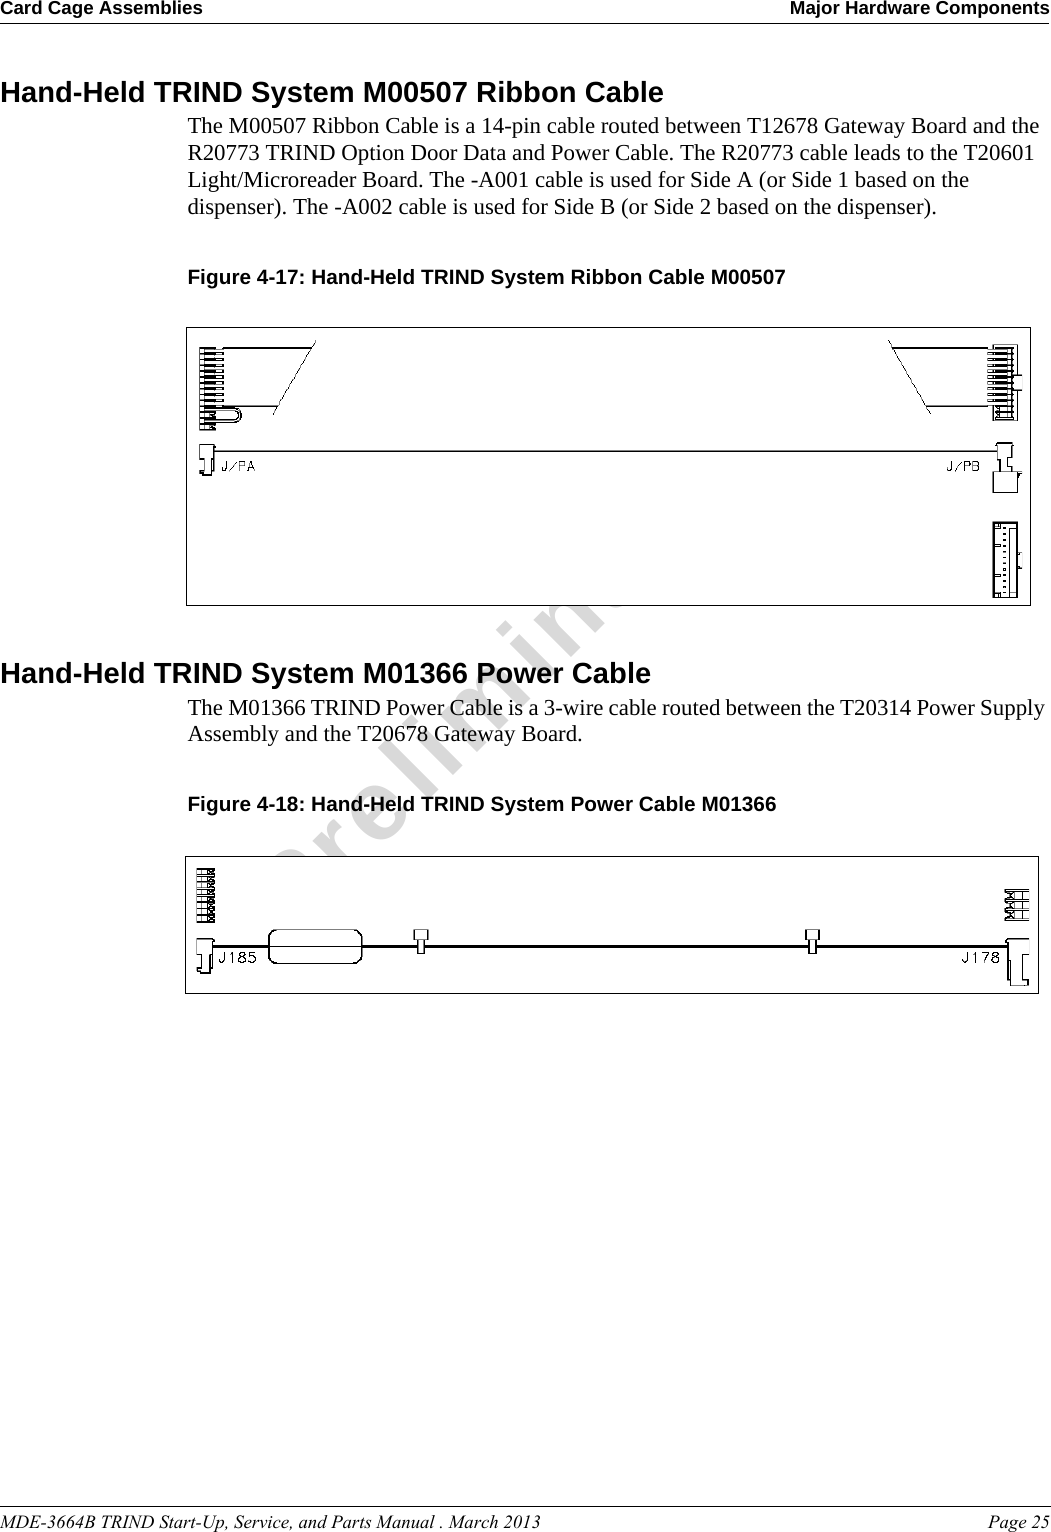 MDE-3664B TRIND Start-Up, Service, and Parts Manual . March 2013 Page 25Card Cage Assemblies Major Hardware ComponentsPreliminaryHand-Held TRIND System M00507 Ribbon CableThe M00507 Ribbon Cable is a 14-pin cable routed between T12678 Gateway Board and the R20773 TRIND Option Door Data and Power Cable. The R20773 cable leads to the T20601 Light/Microreader Board. The -A001 cable is used for Side A (or Side 1 based on the dispenser). The -A002 cable is used for Side B (or Side 2 based on the dispenser).Figure 4-17: Hand-Held TRIND System Ribbon Cable M00507Hand-Held TRIND System M01366 Power CableThe M01366 TRIND Power Cable is a 3-wire cable routed between the T20314 Power Supply Assembly and the T20678 Gateway Board.Figure 4-18: Hand-Held TRIND System Power Cable M01366